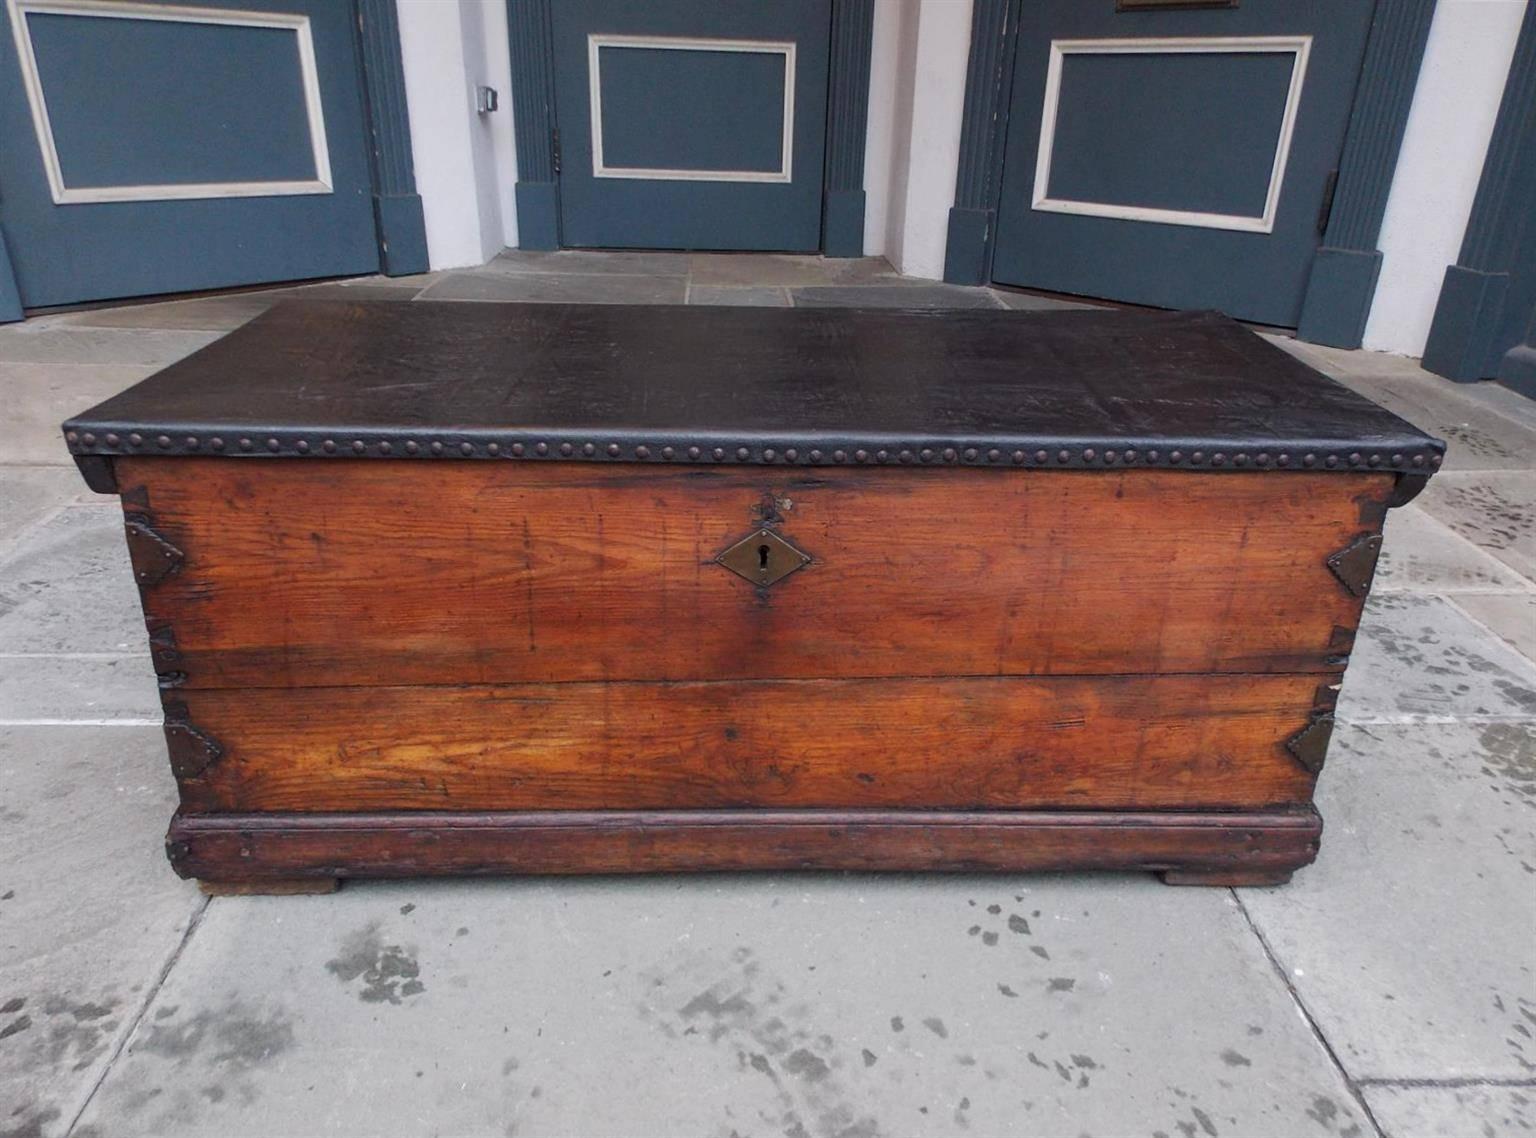 American pine and leather brass studded Nautical sea chest with braided rope beckets, wrought iron side mounts, painted fitted interior with flanking tills, and terminating on a carved molded edge base, Early 19th century.